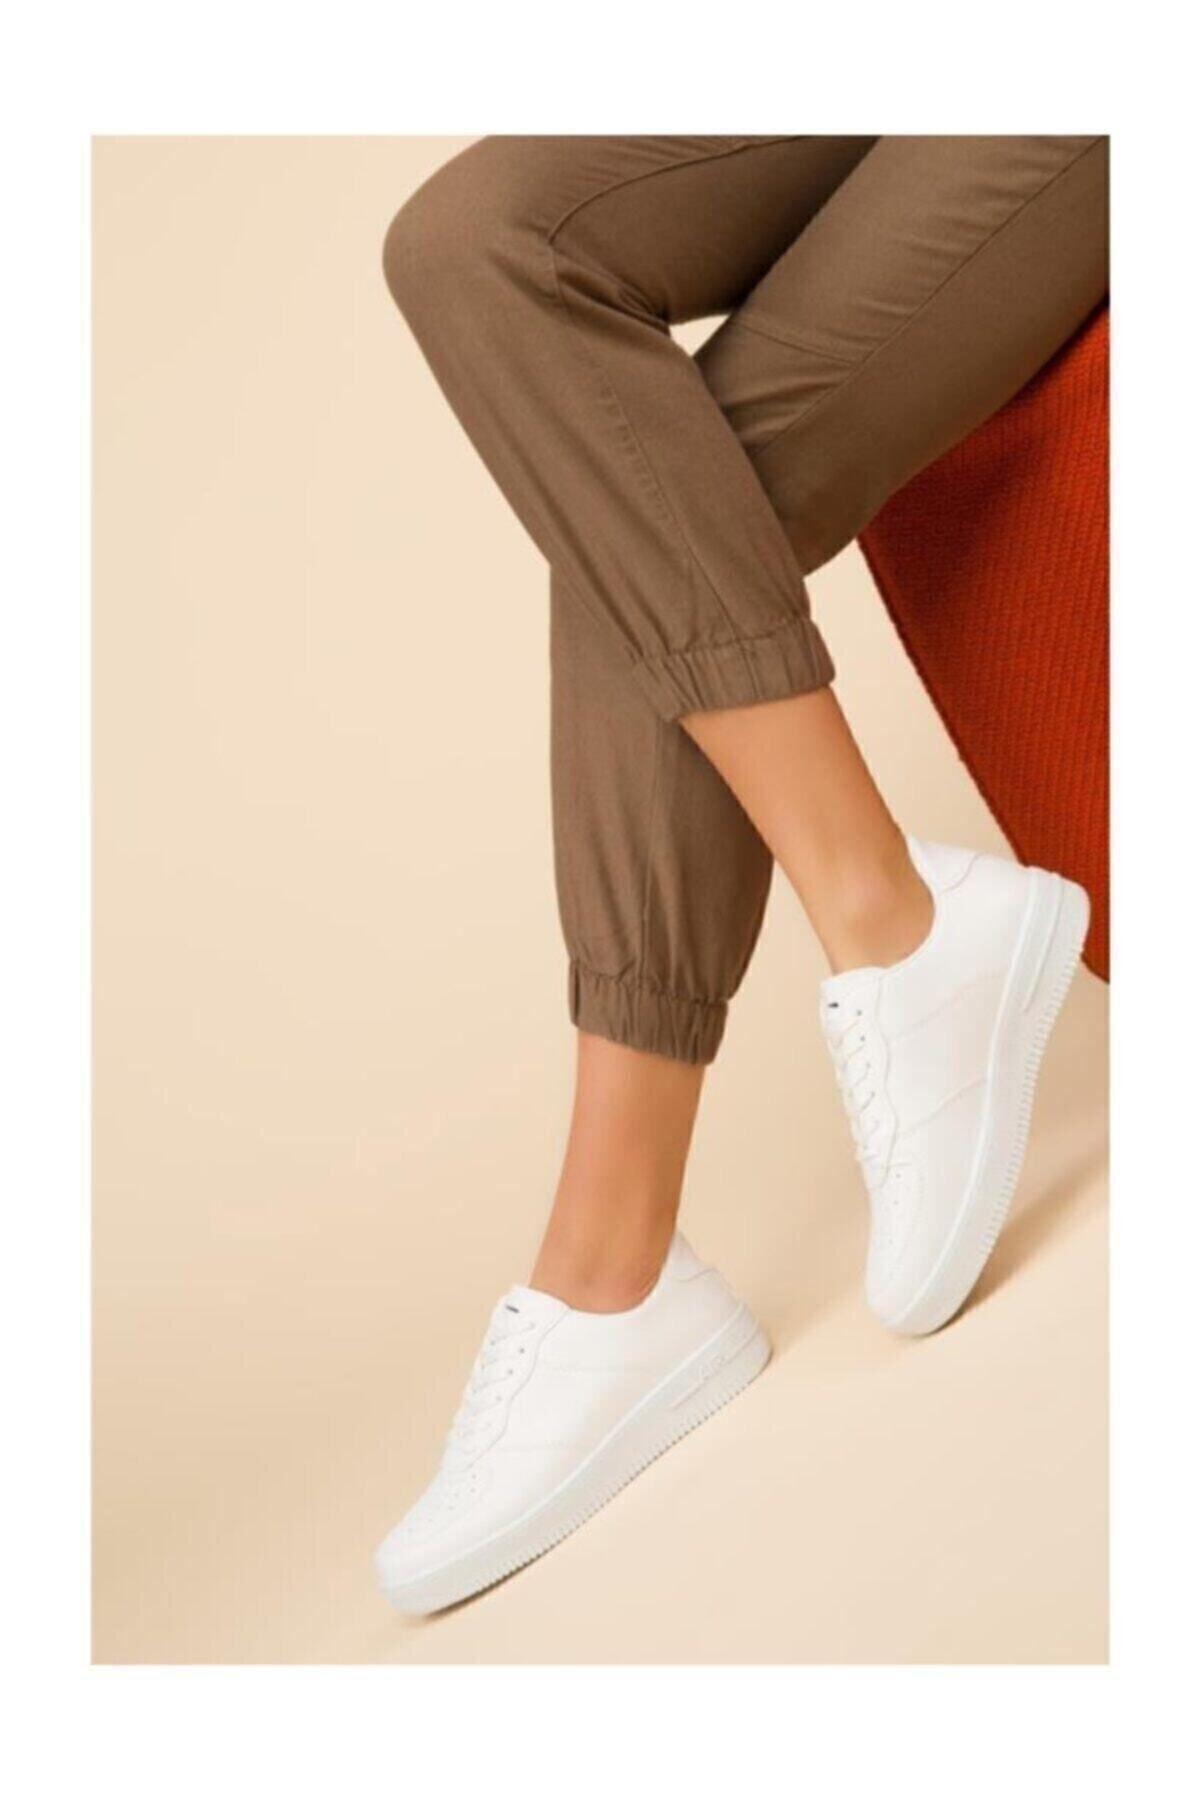 Unisex white sneakers daily sneakers